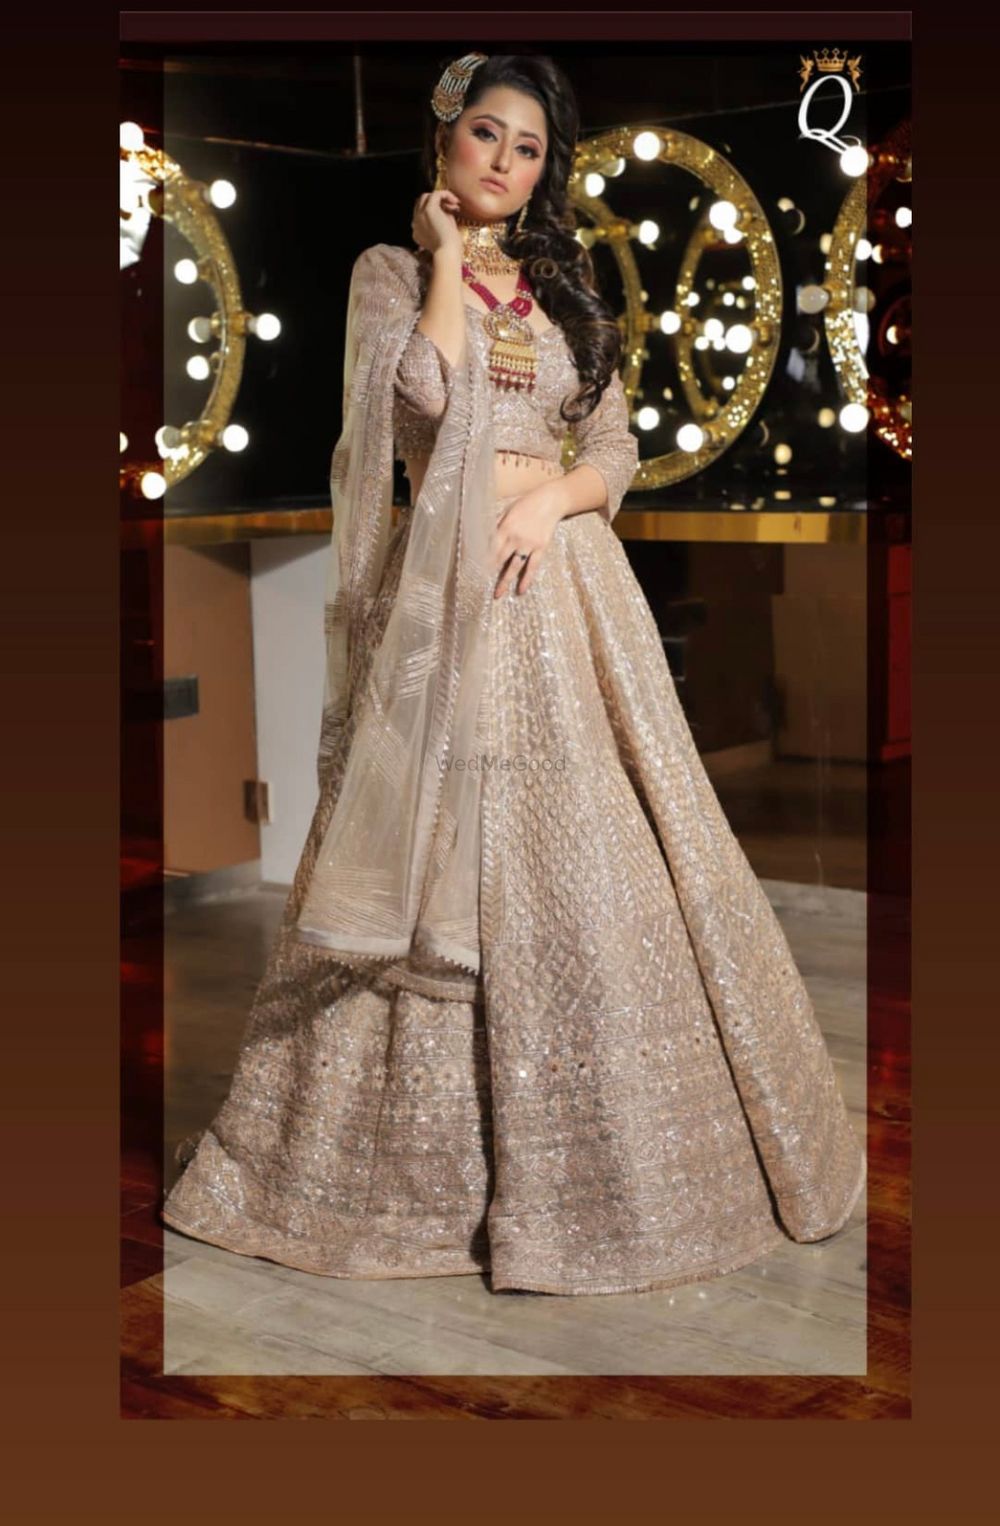 Photo By Aakarshan Boutique Pvt Ltd  - Bridal Wear